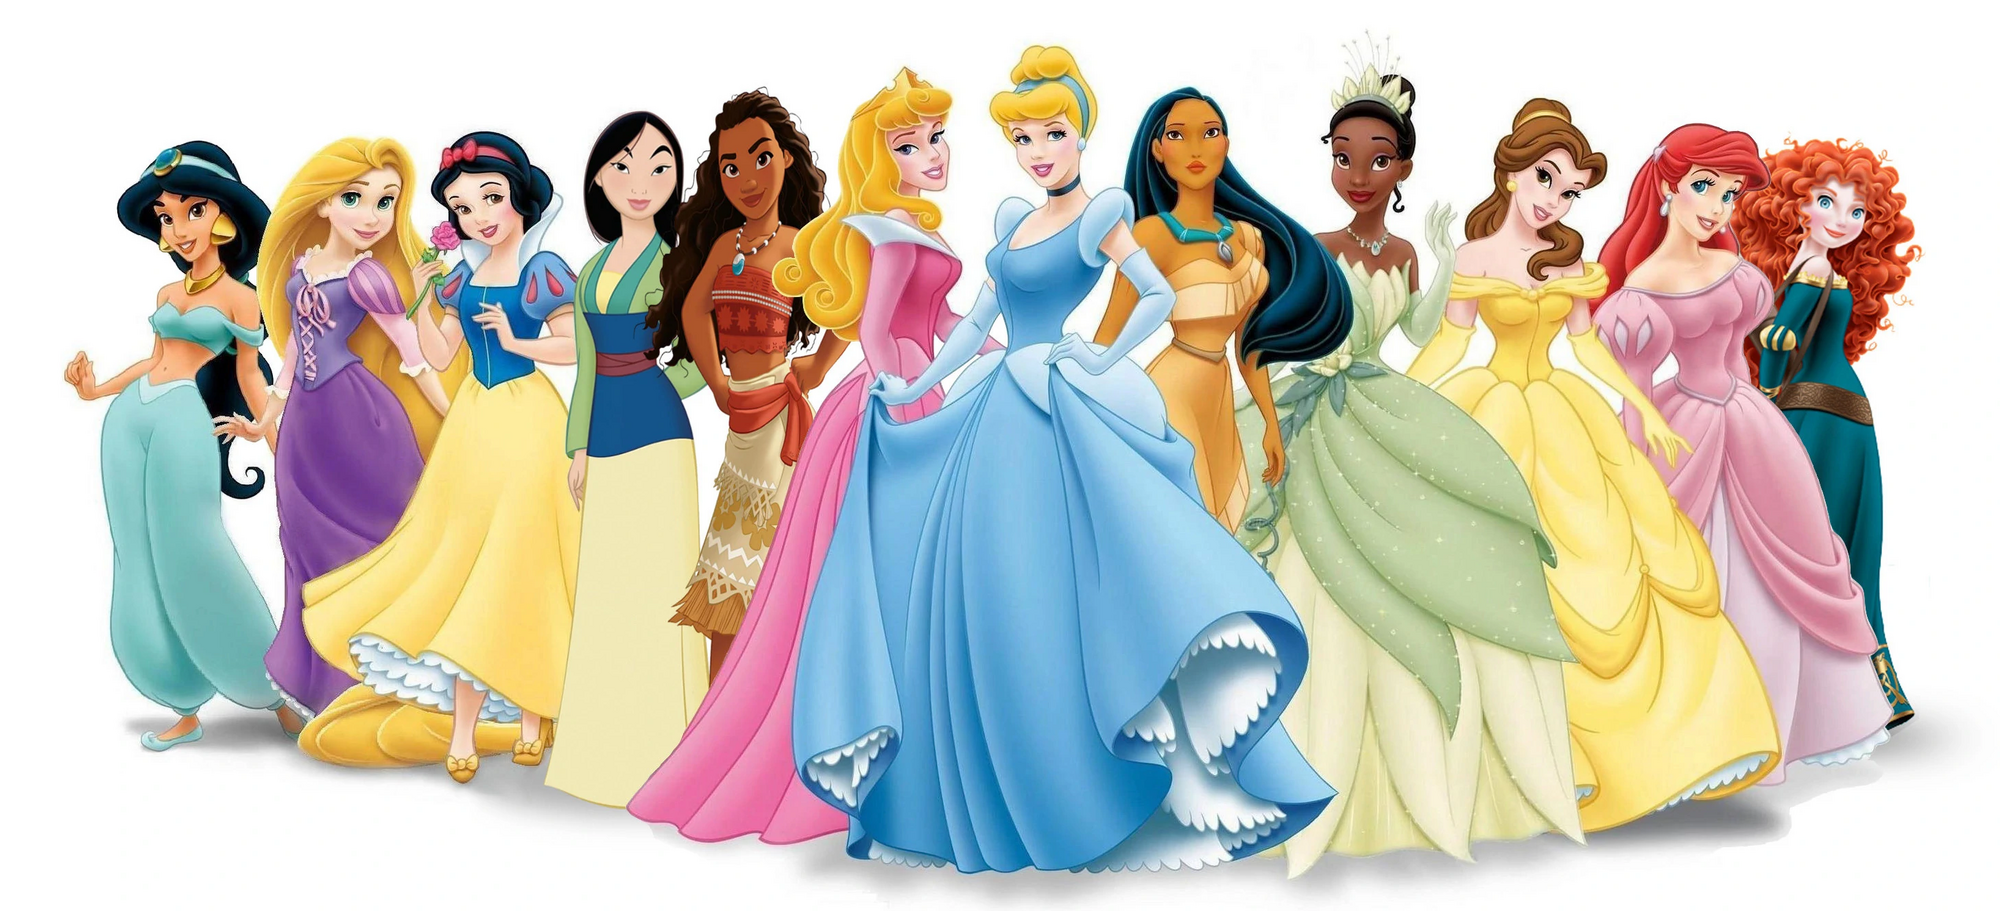 The Definitive Ranking of the Disney Princesses! -